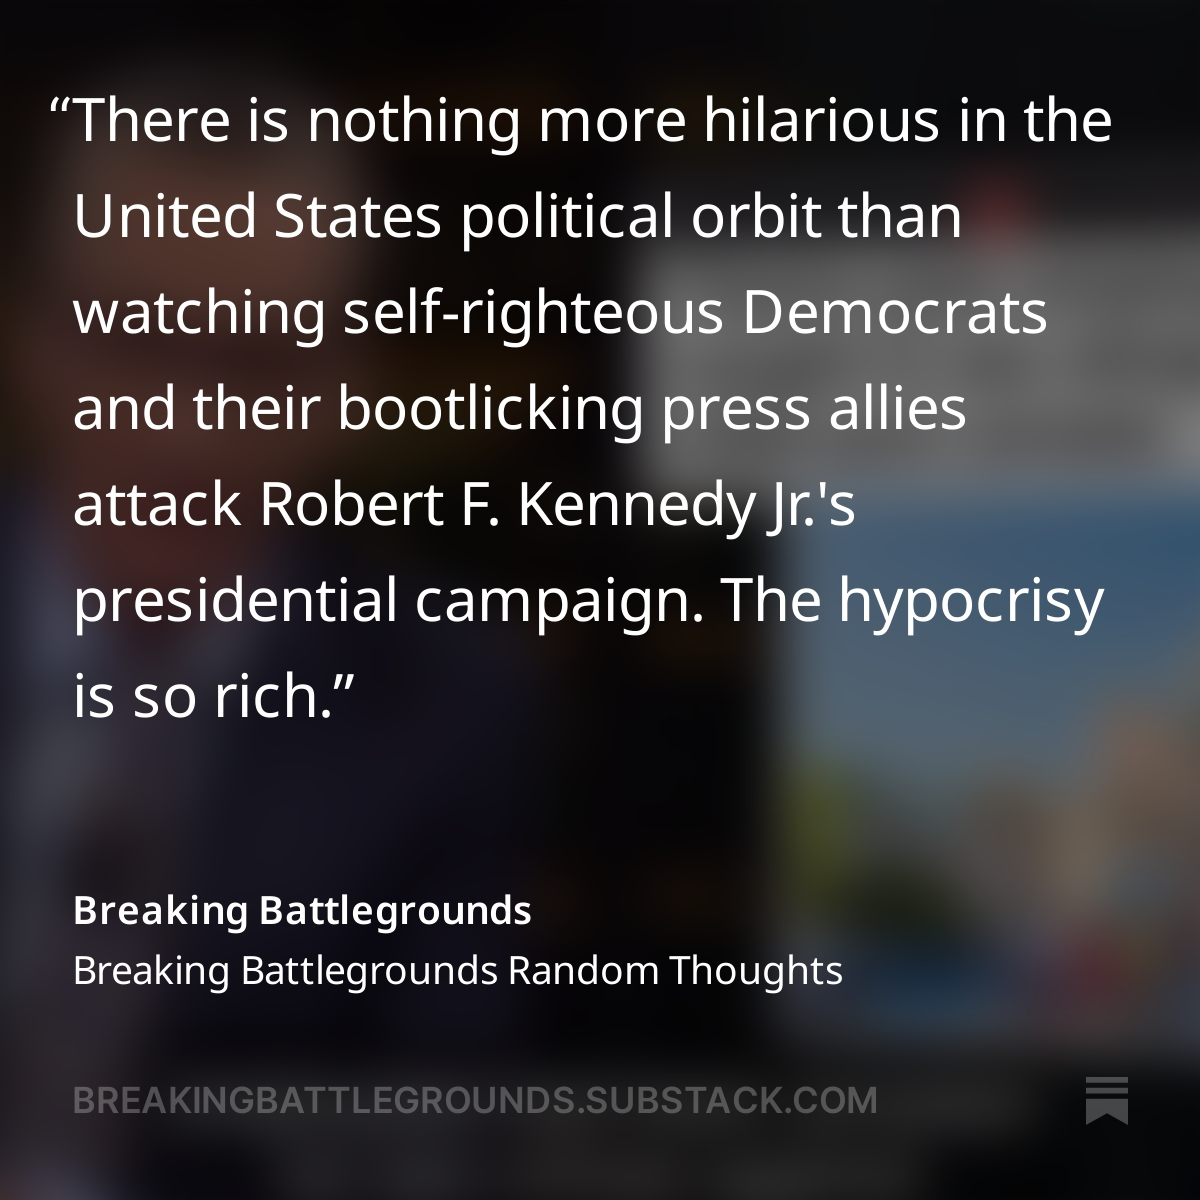 Tune in to 'Breaking Battlegrounds Random Thoughts' to never miss us calling out the left's hypocrisy. Read the full Random Thoughts piece for this week here⤵️ breakingbattlegrounds.substack.com/p/breaking-bat… We discuss all things from @JoeBiden and his Democrat friends doing everything to block